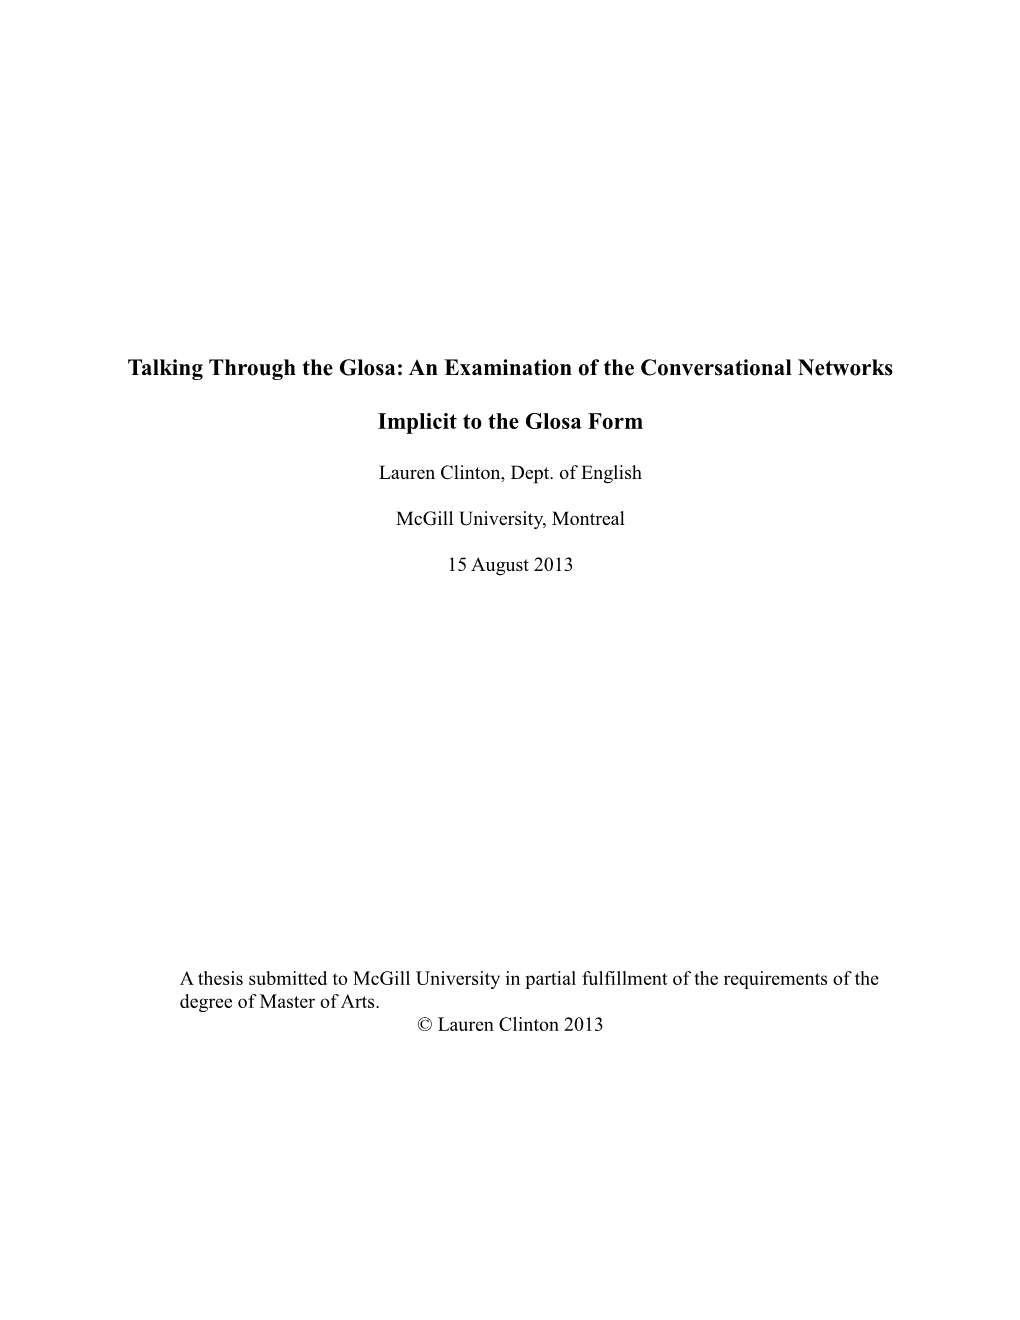 Talking Through the Glosa: an Examination of the Conversational Networks